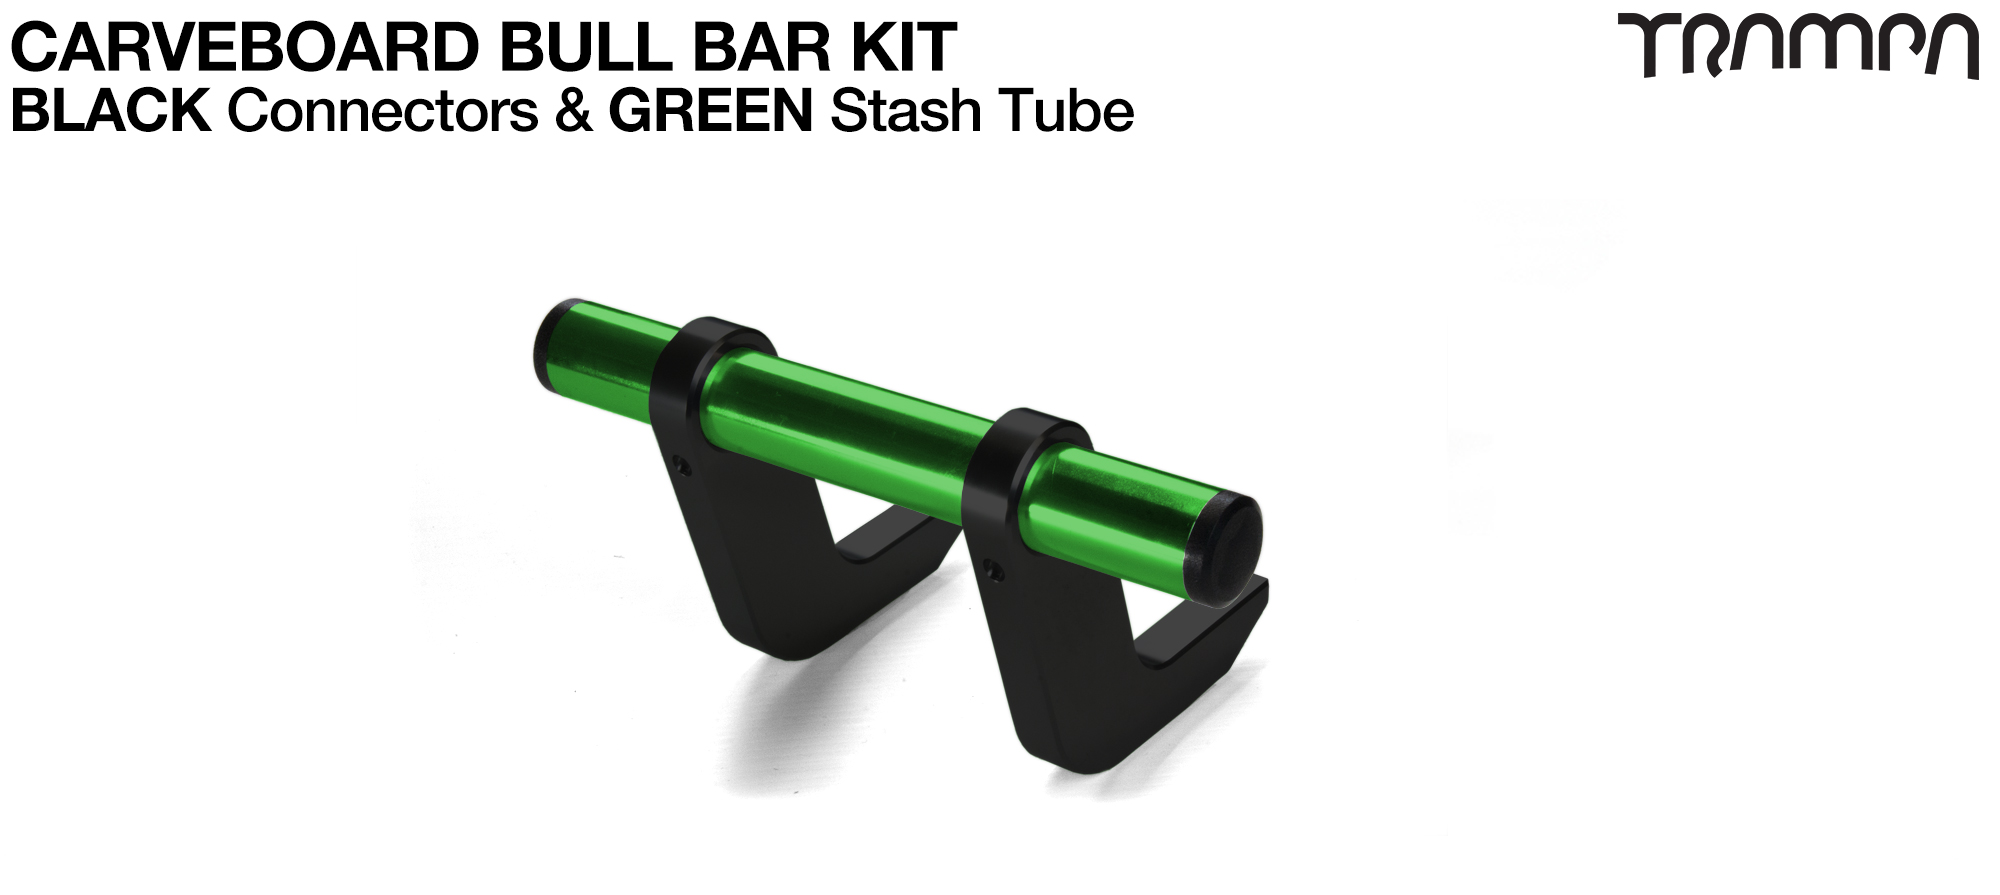 BLACK Uprights & GREEN Crossbar BULL BARS for CARVE BOARDS using T6 Heat Treated CNC'd AluminIum Clamps, Hollow Aluminium Stash Tubes with Rubber end bungs  